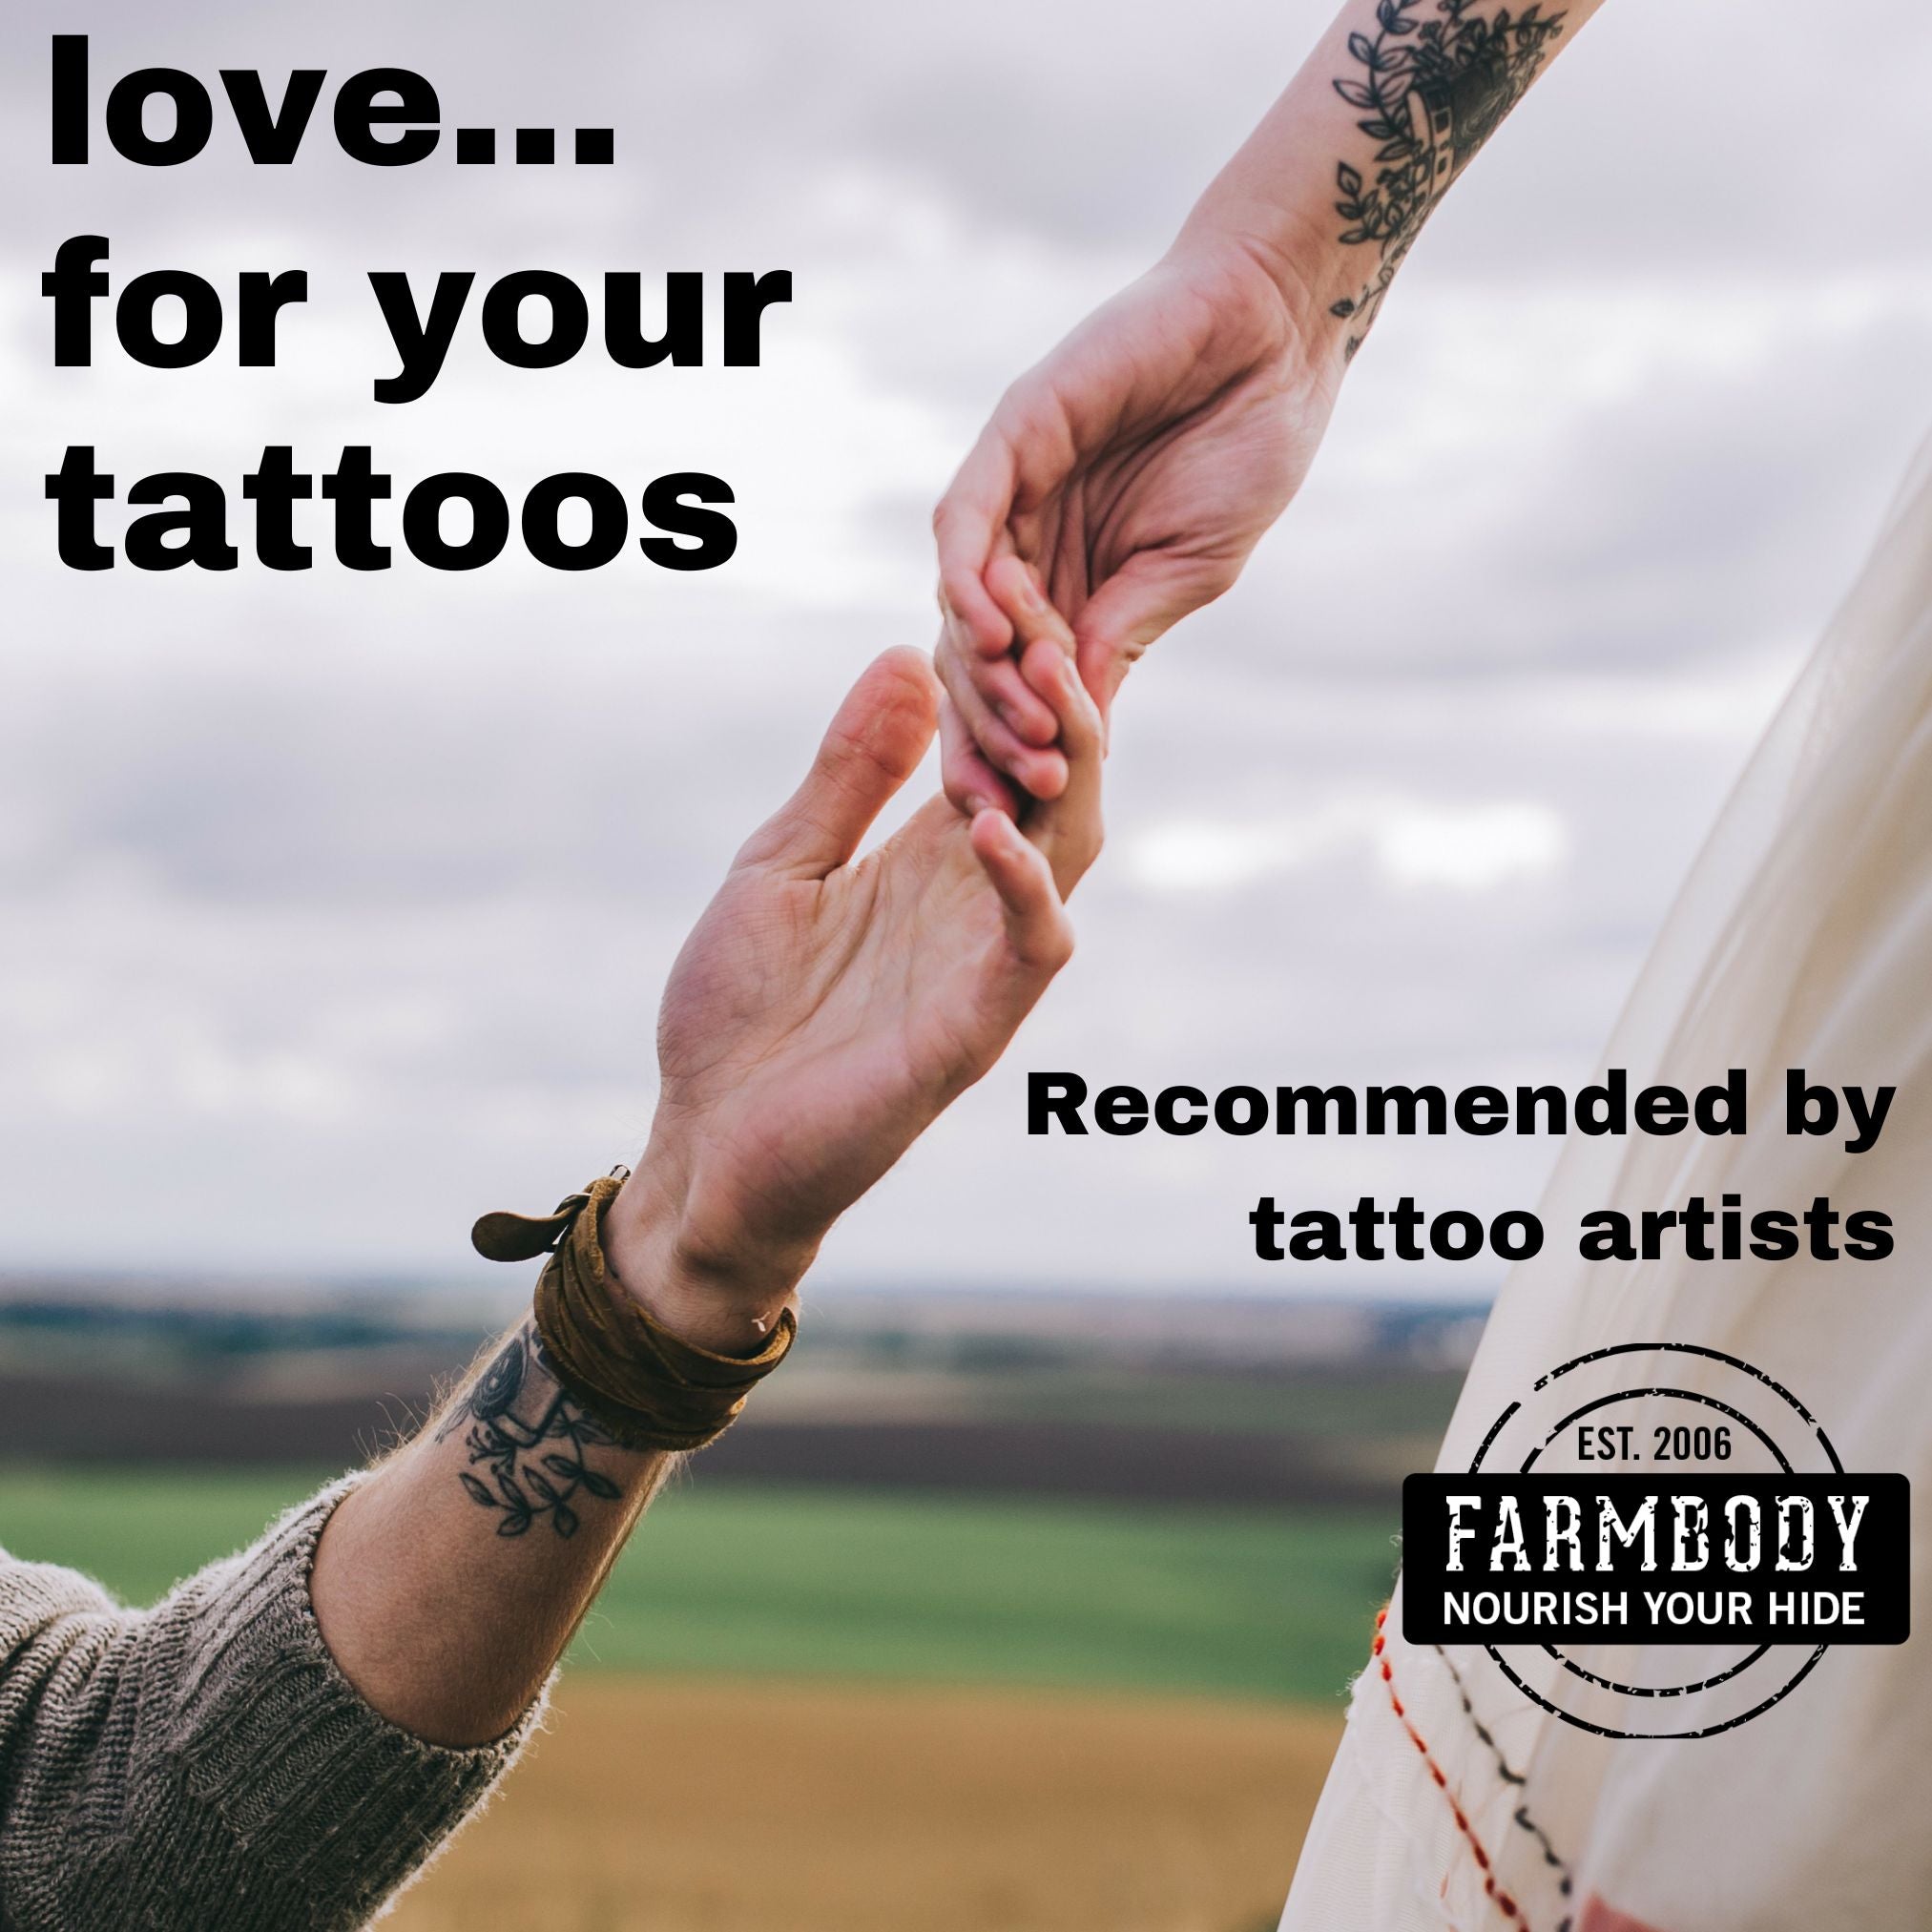 Farmbody tattoo aftercare gives love for your tattoos